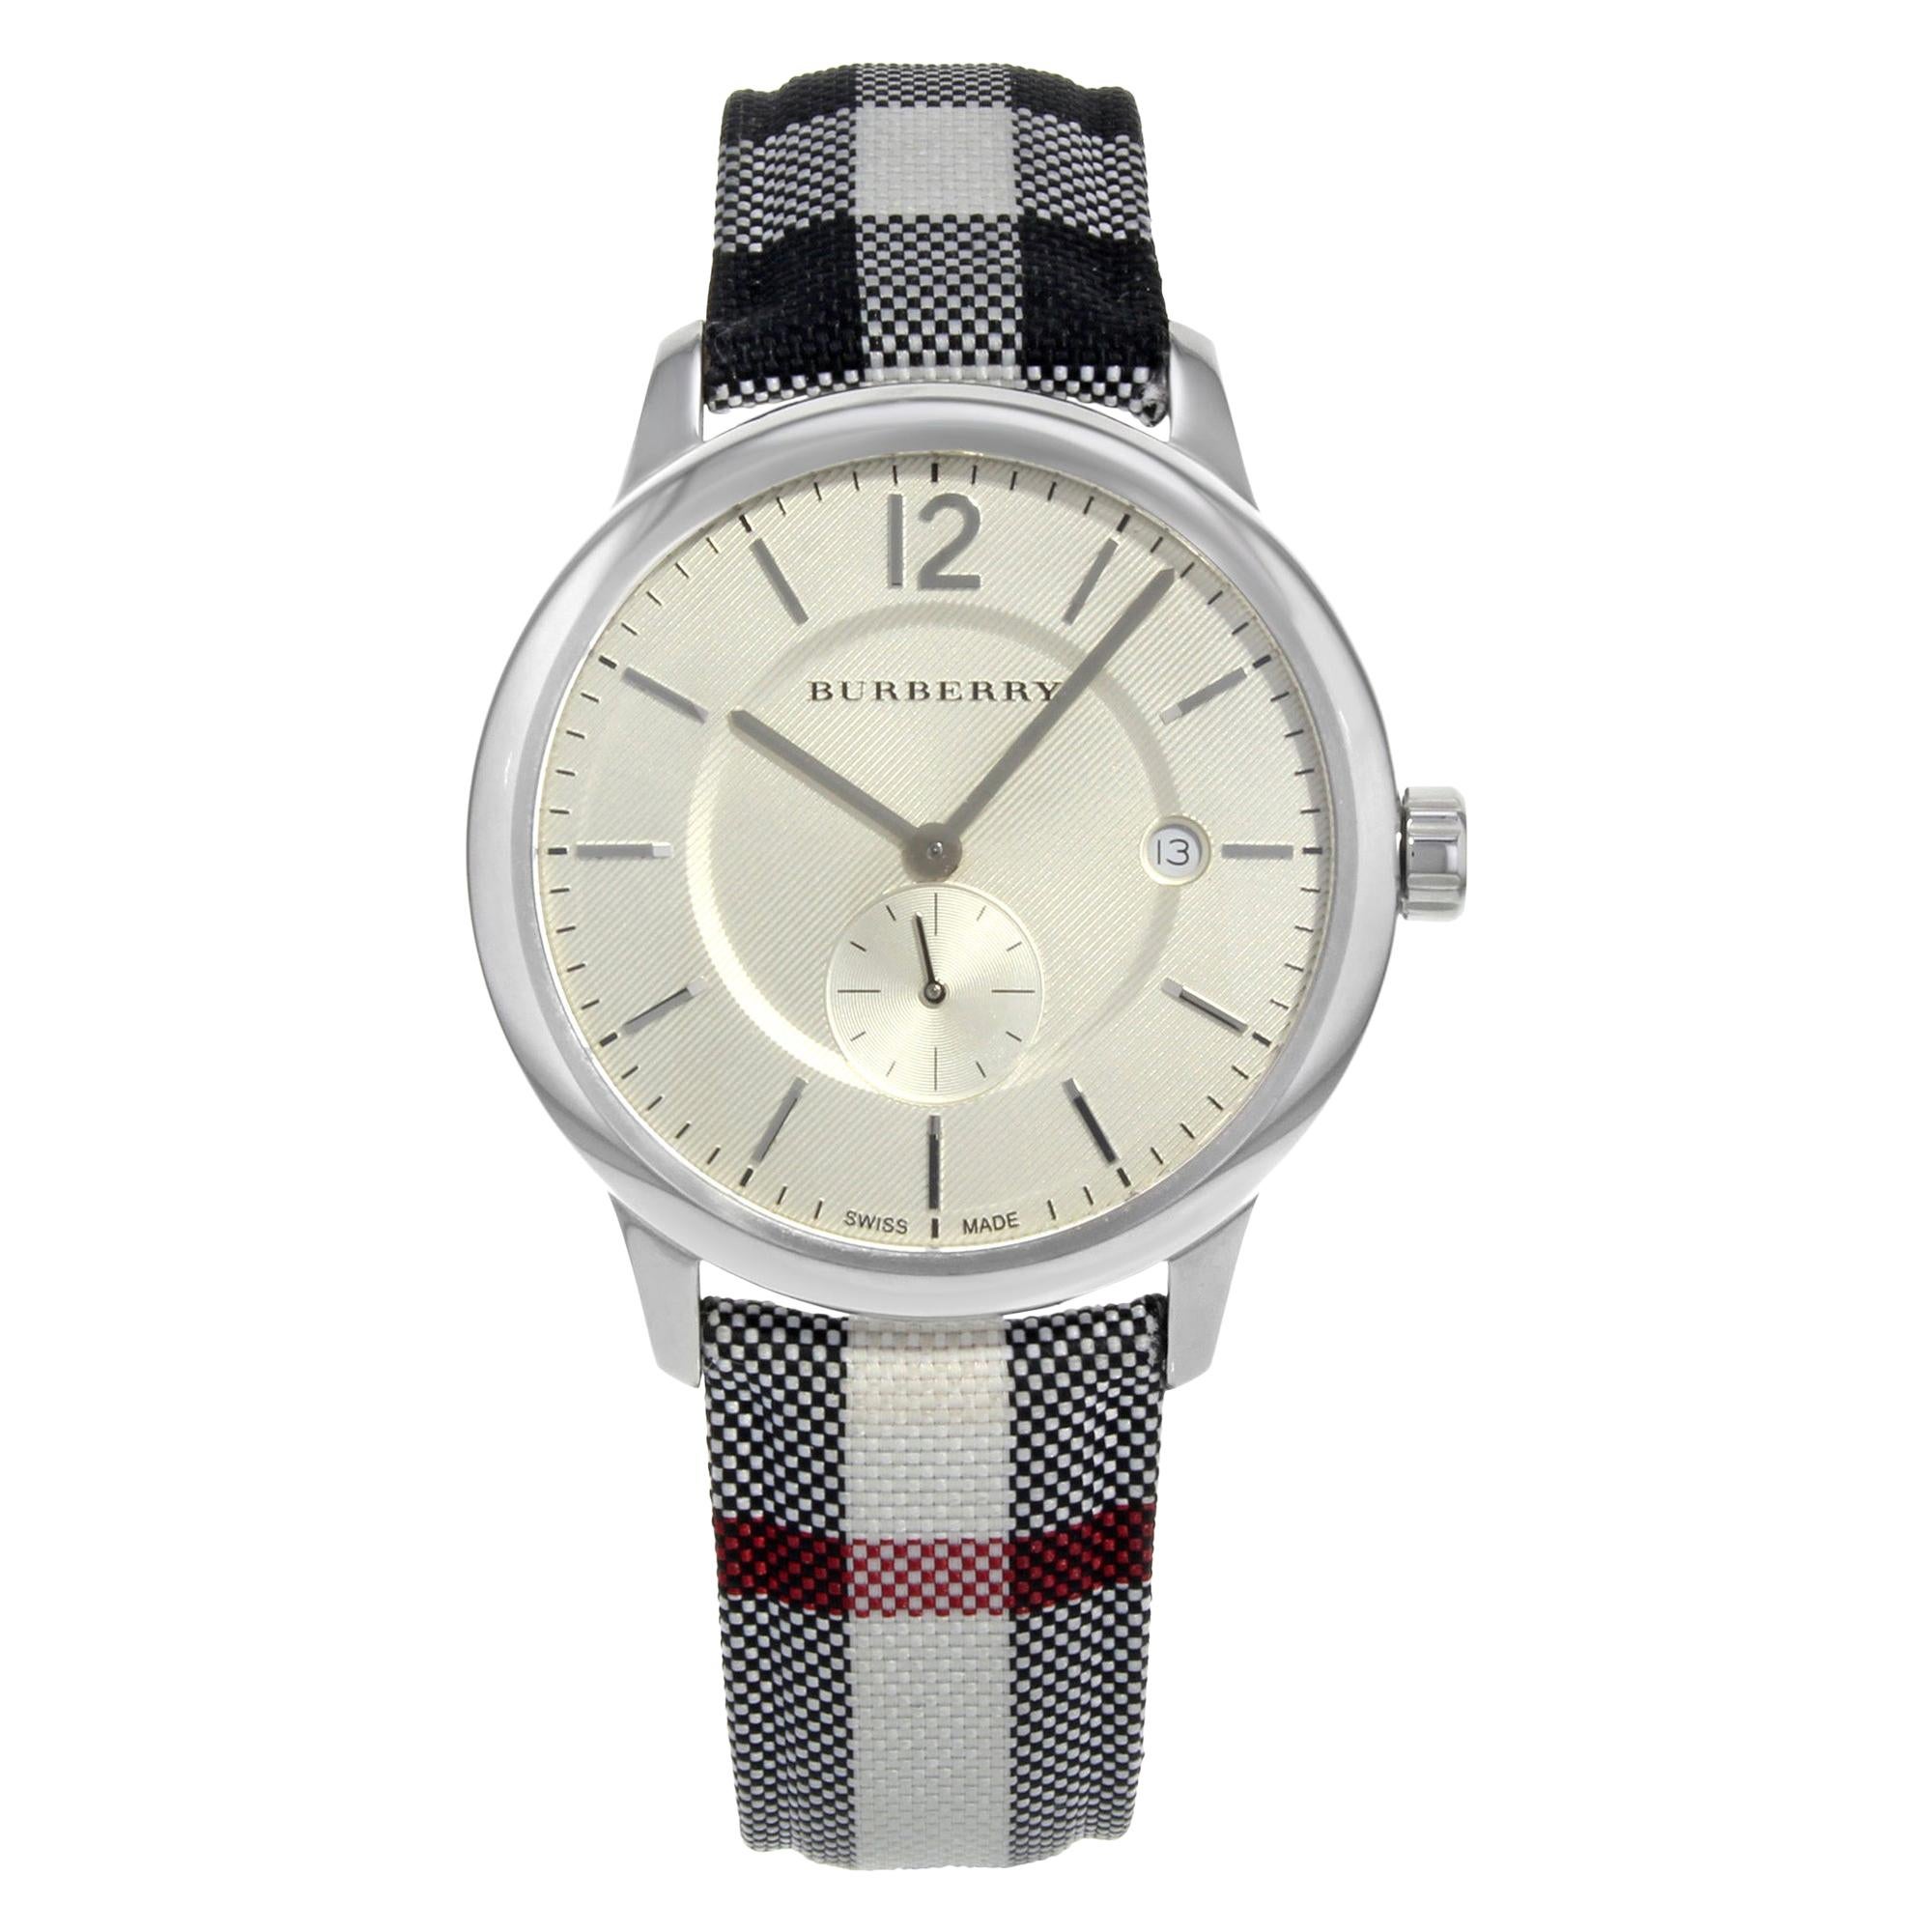 Burberry the Classic Round Silver Dial Steel Quartz Unisex Watch BU10002 For Sale